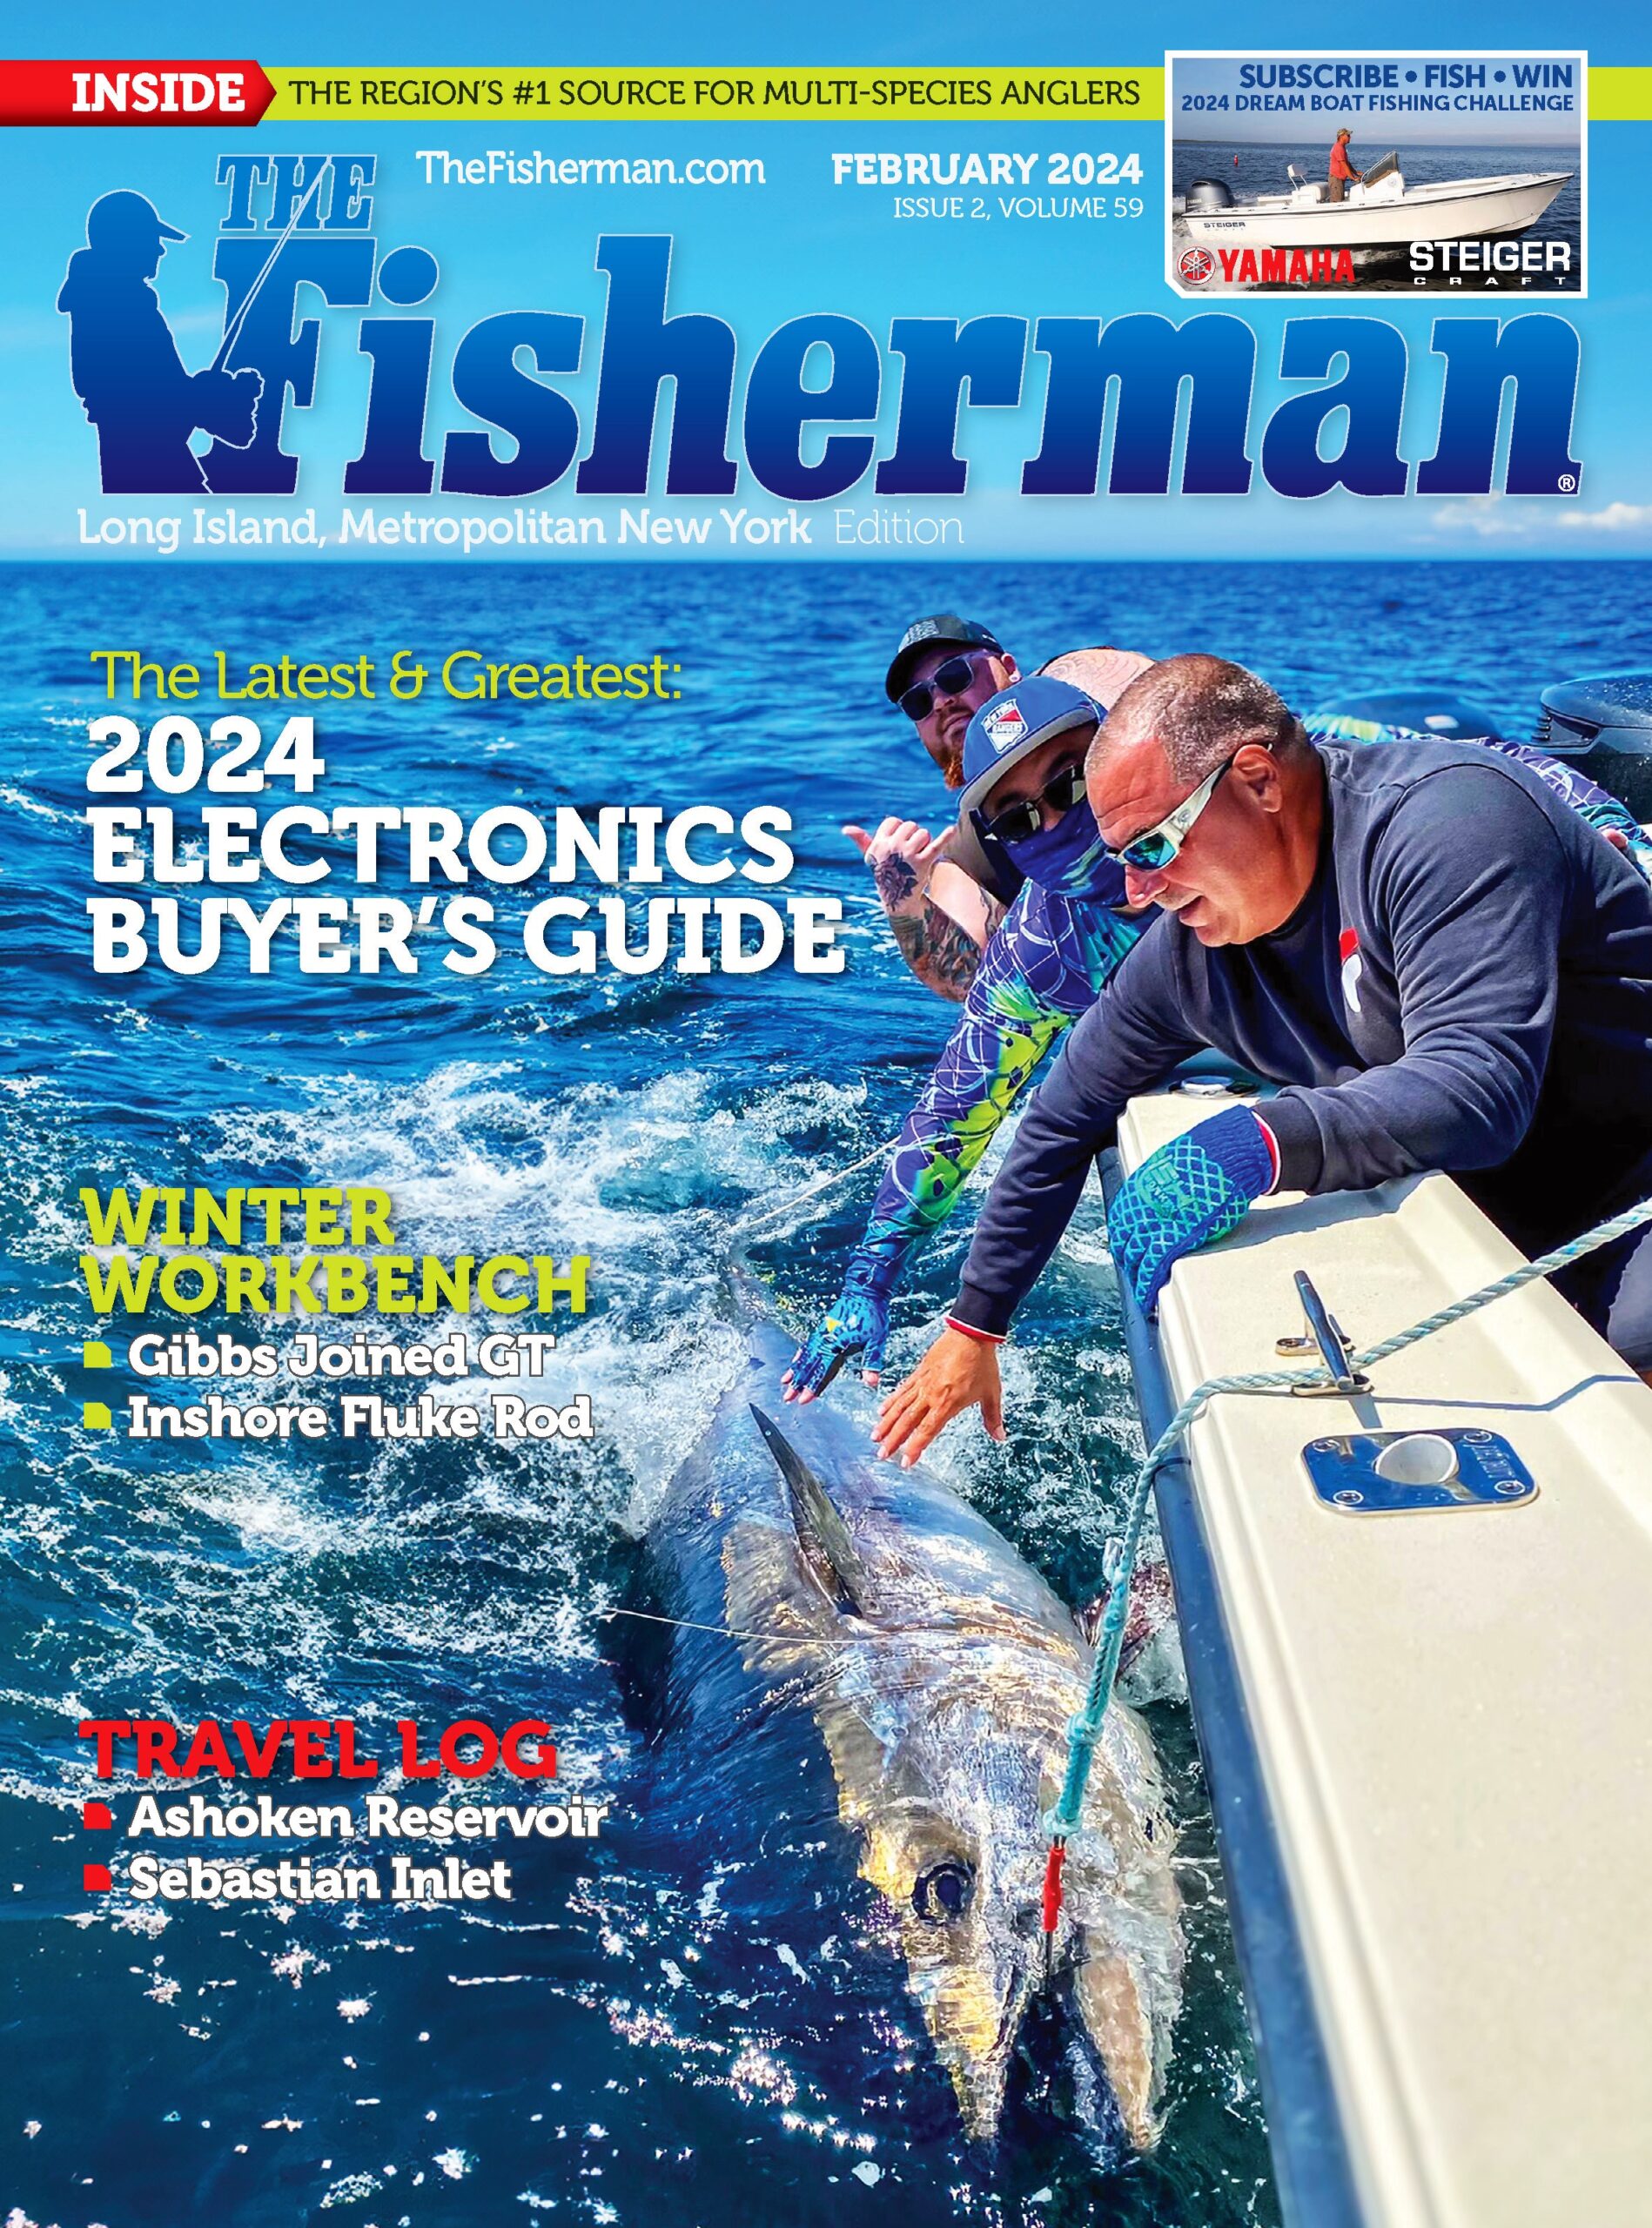 https://www.thefisherman.com/wp-content/uploads/2024/01/Covers_02_TOC_Page_3-1-scaled.jpg